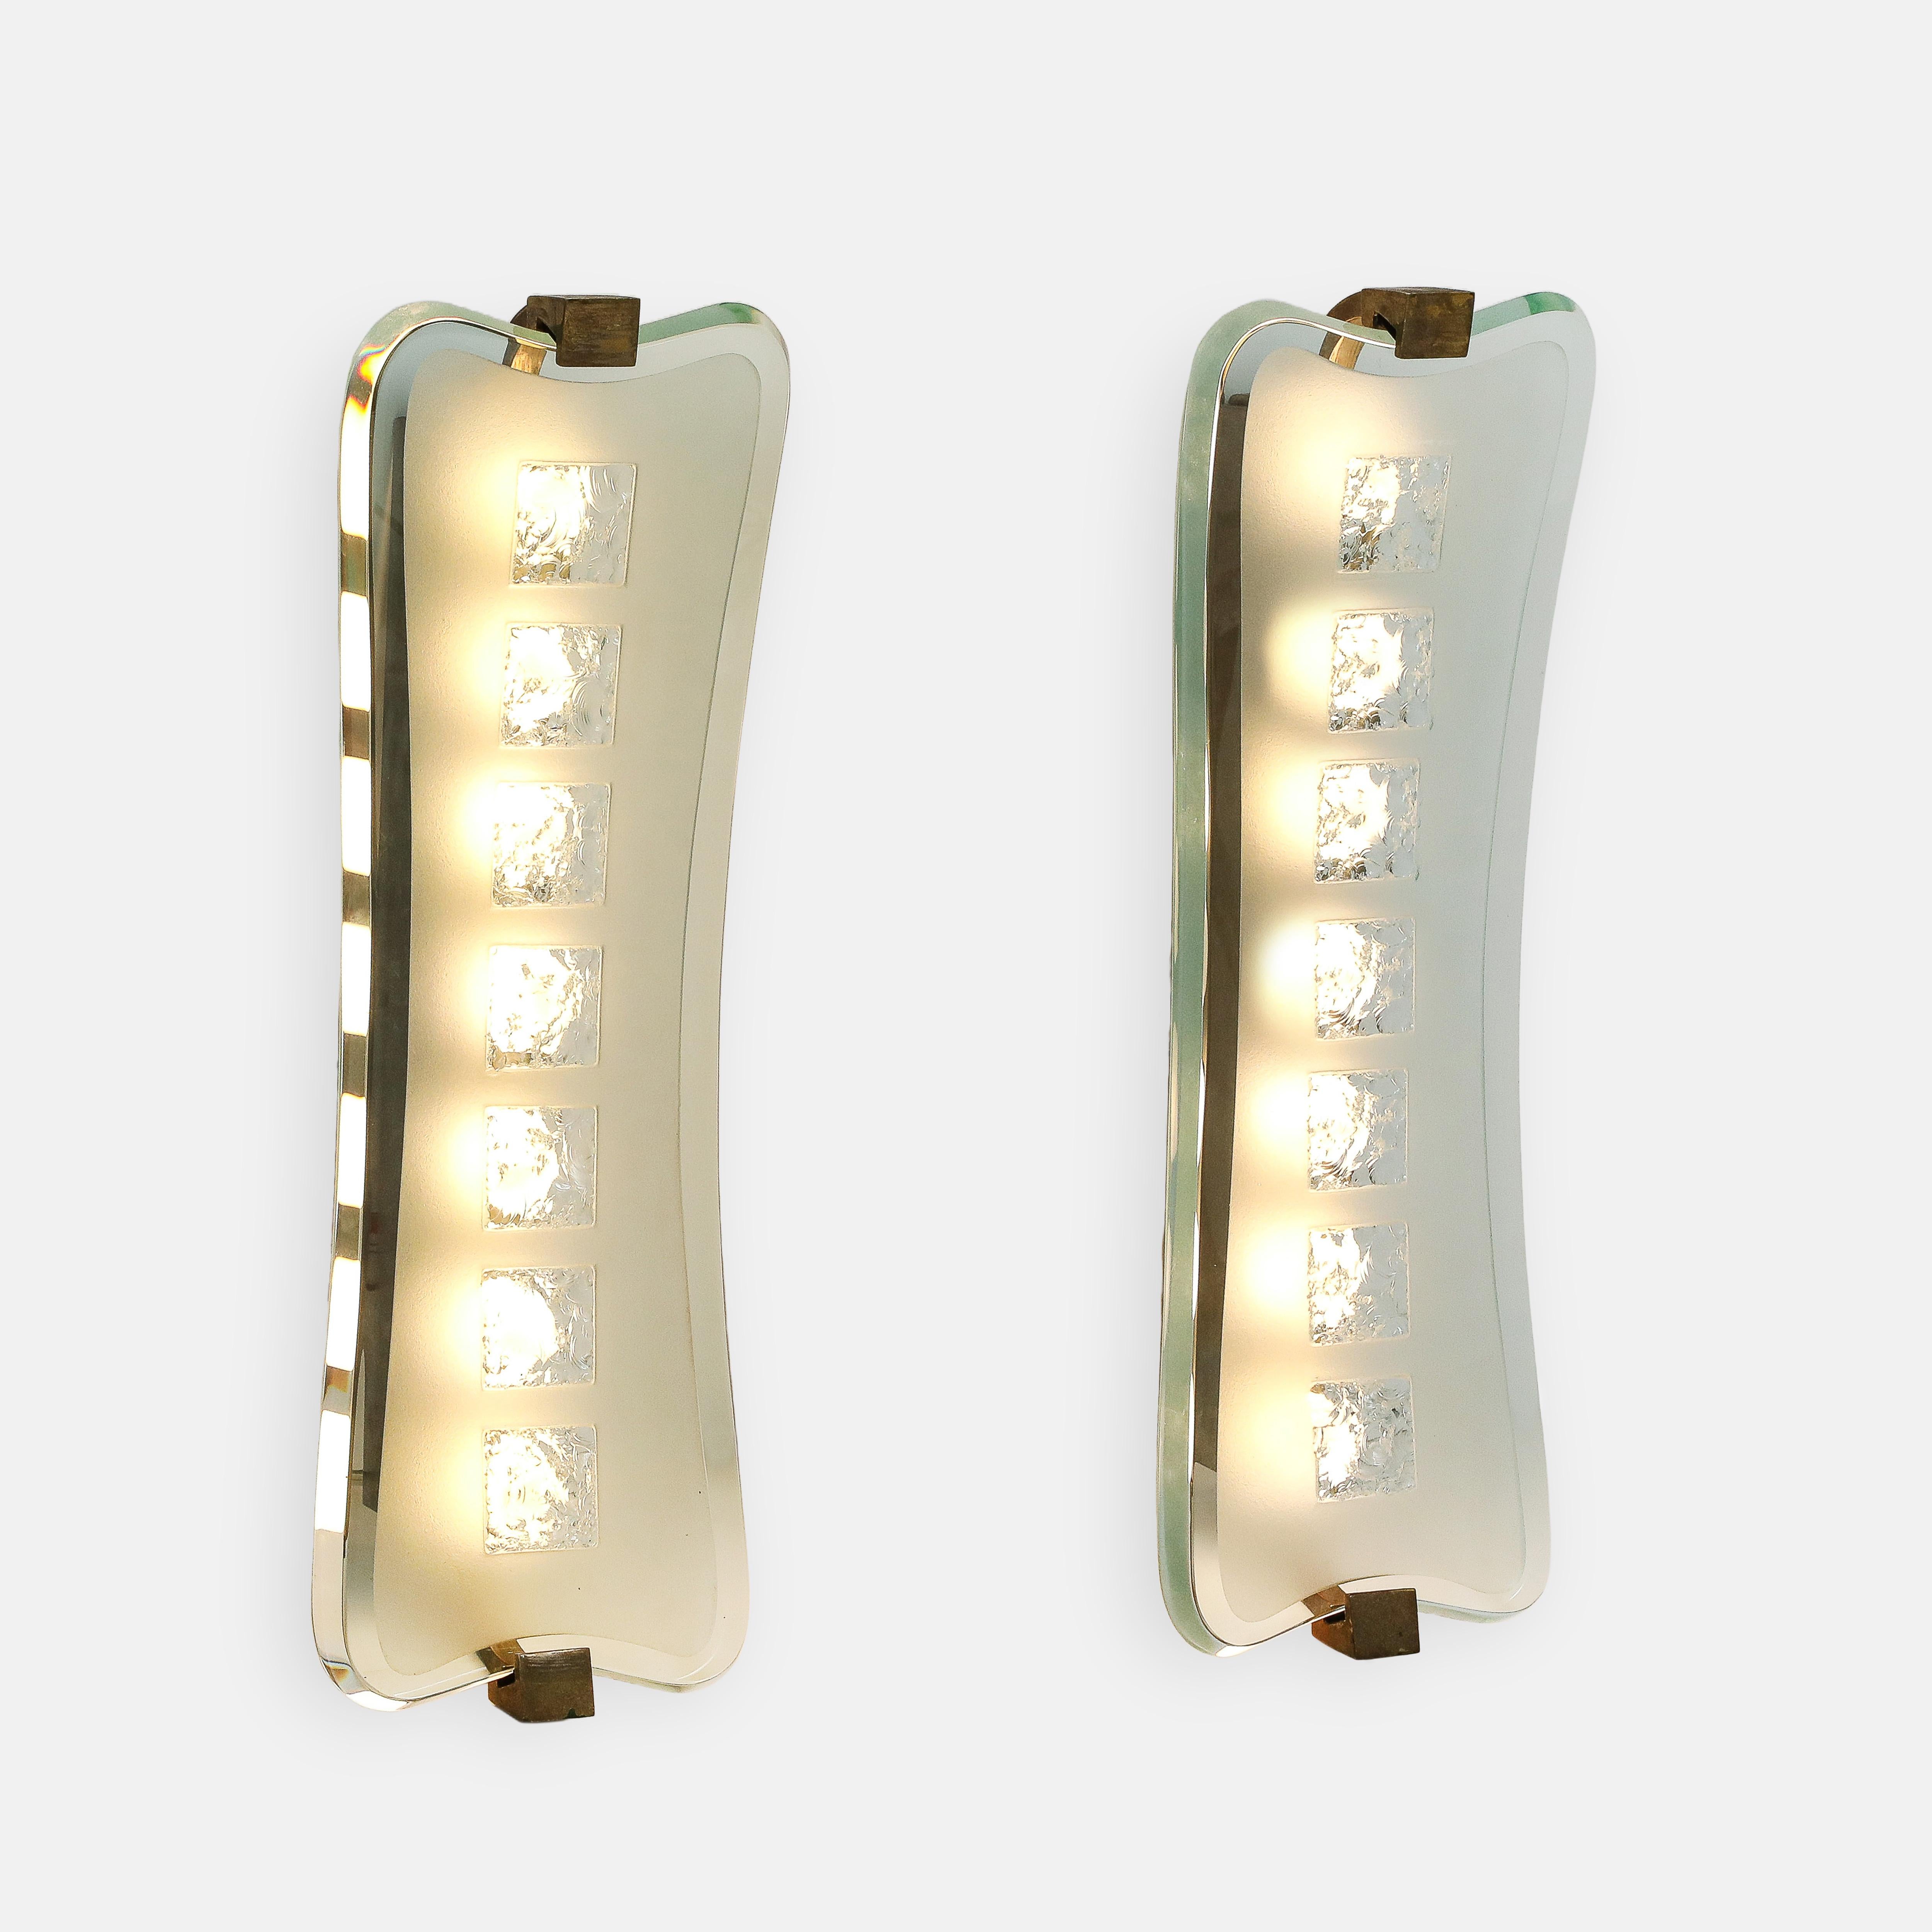 Max Ingrand for Fontana Arte rare large pair of sconces model 1568 with thick large curved crystal glass plates consisting of polished outer frame and inner satin-finished glass with central hand chiseled squares and beveled edges, brass mounts, and